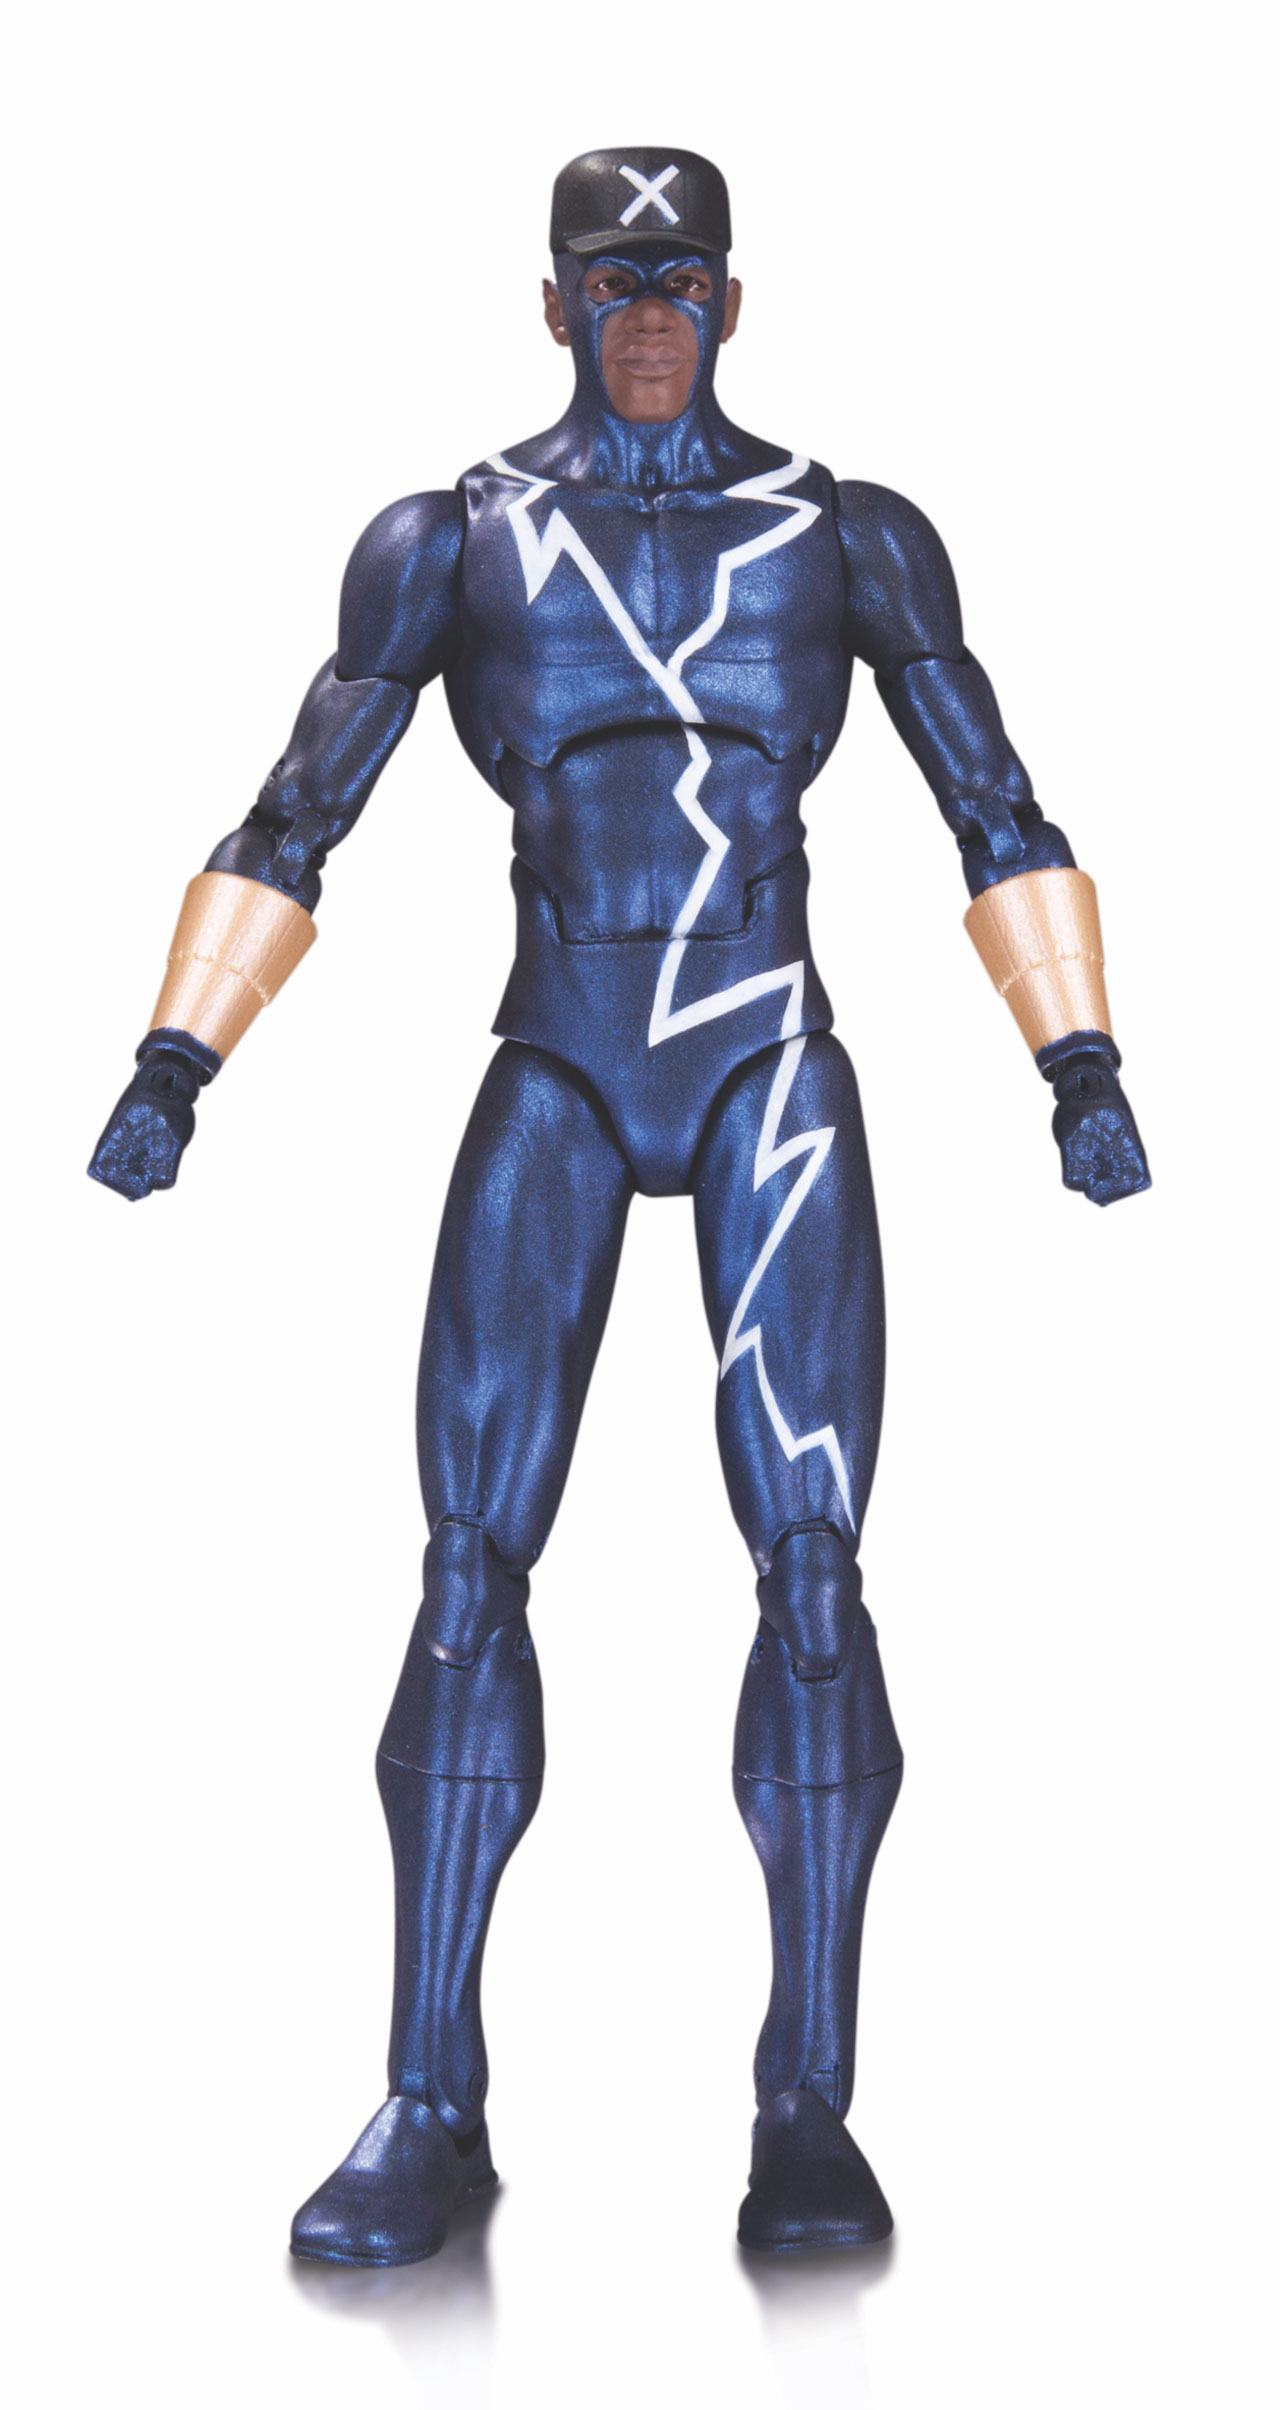 DC ICONS STATIC ACTION FIGURE